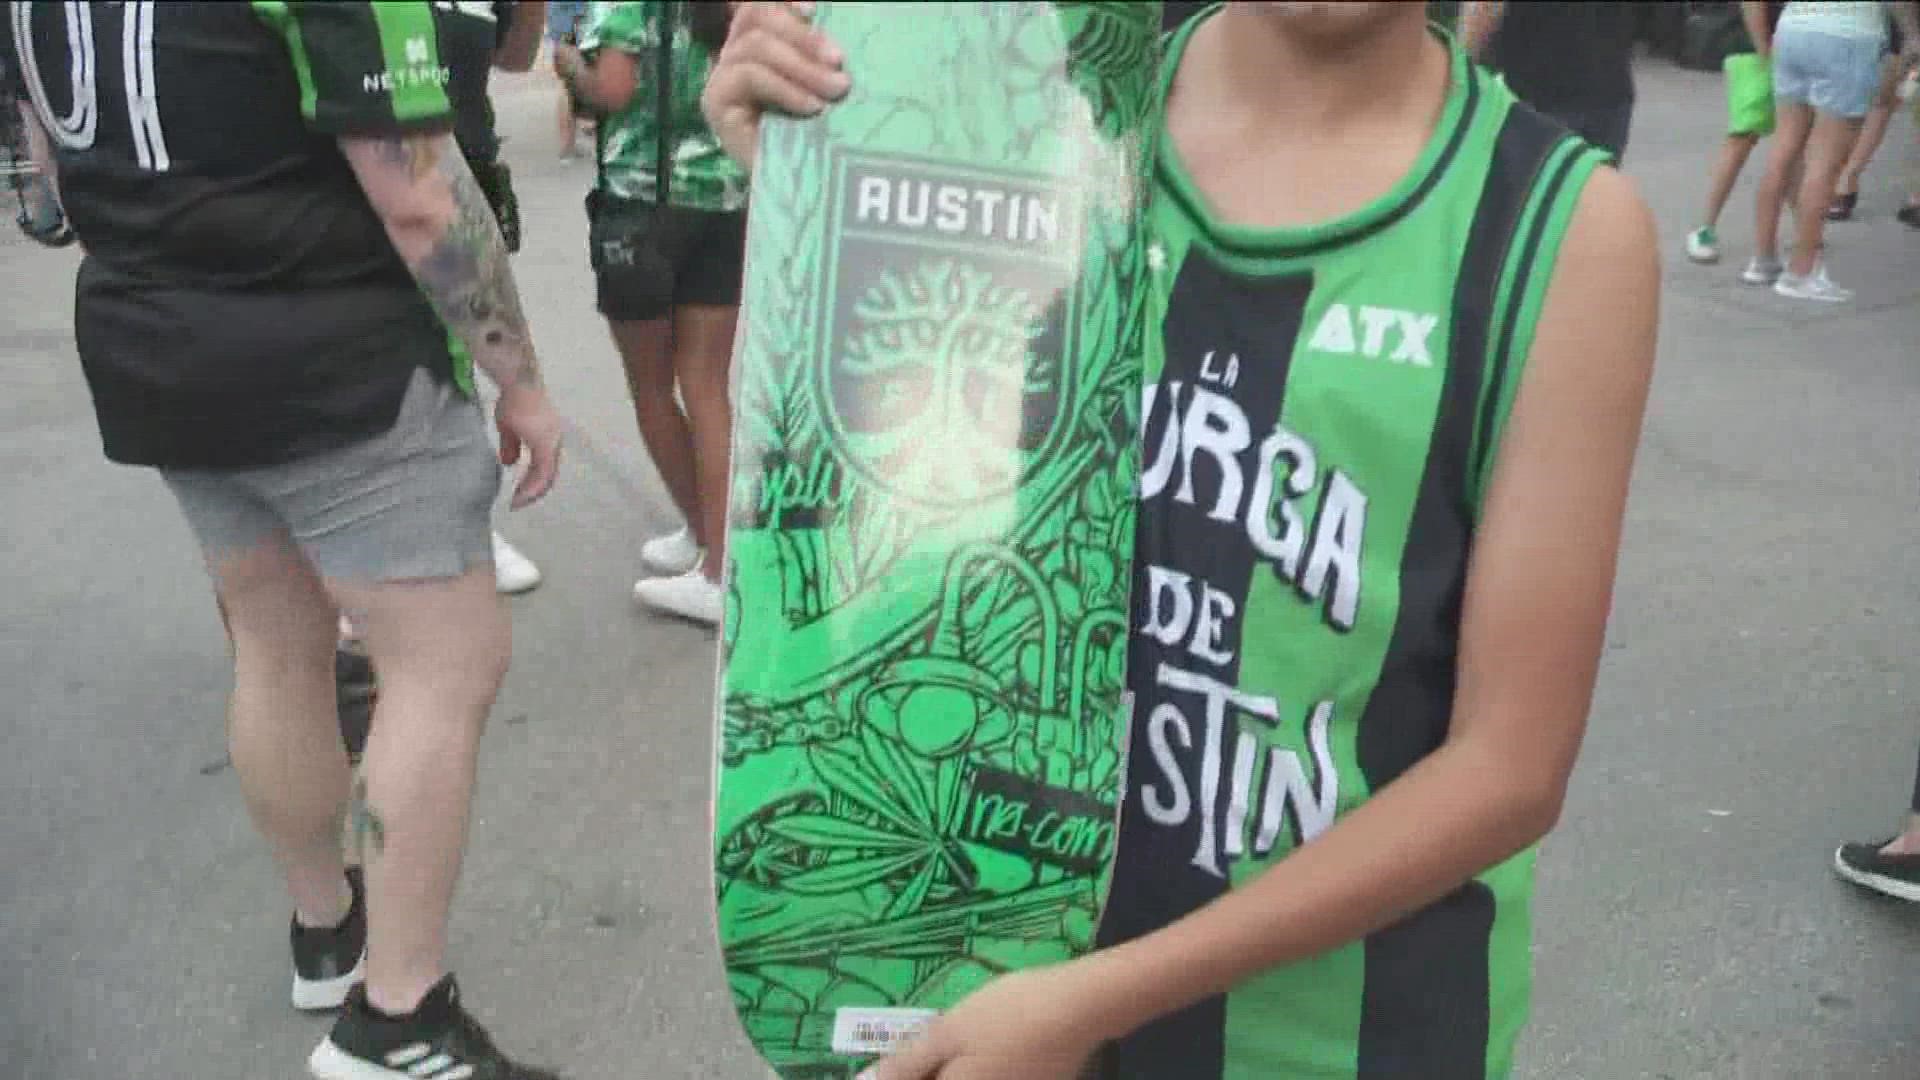 All of the Verde and Black fans celebrated a collaboration between the No-Comply skating community and Austin FC on Tuesday night.